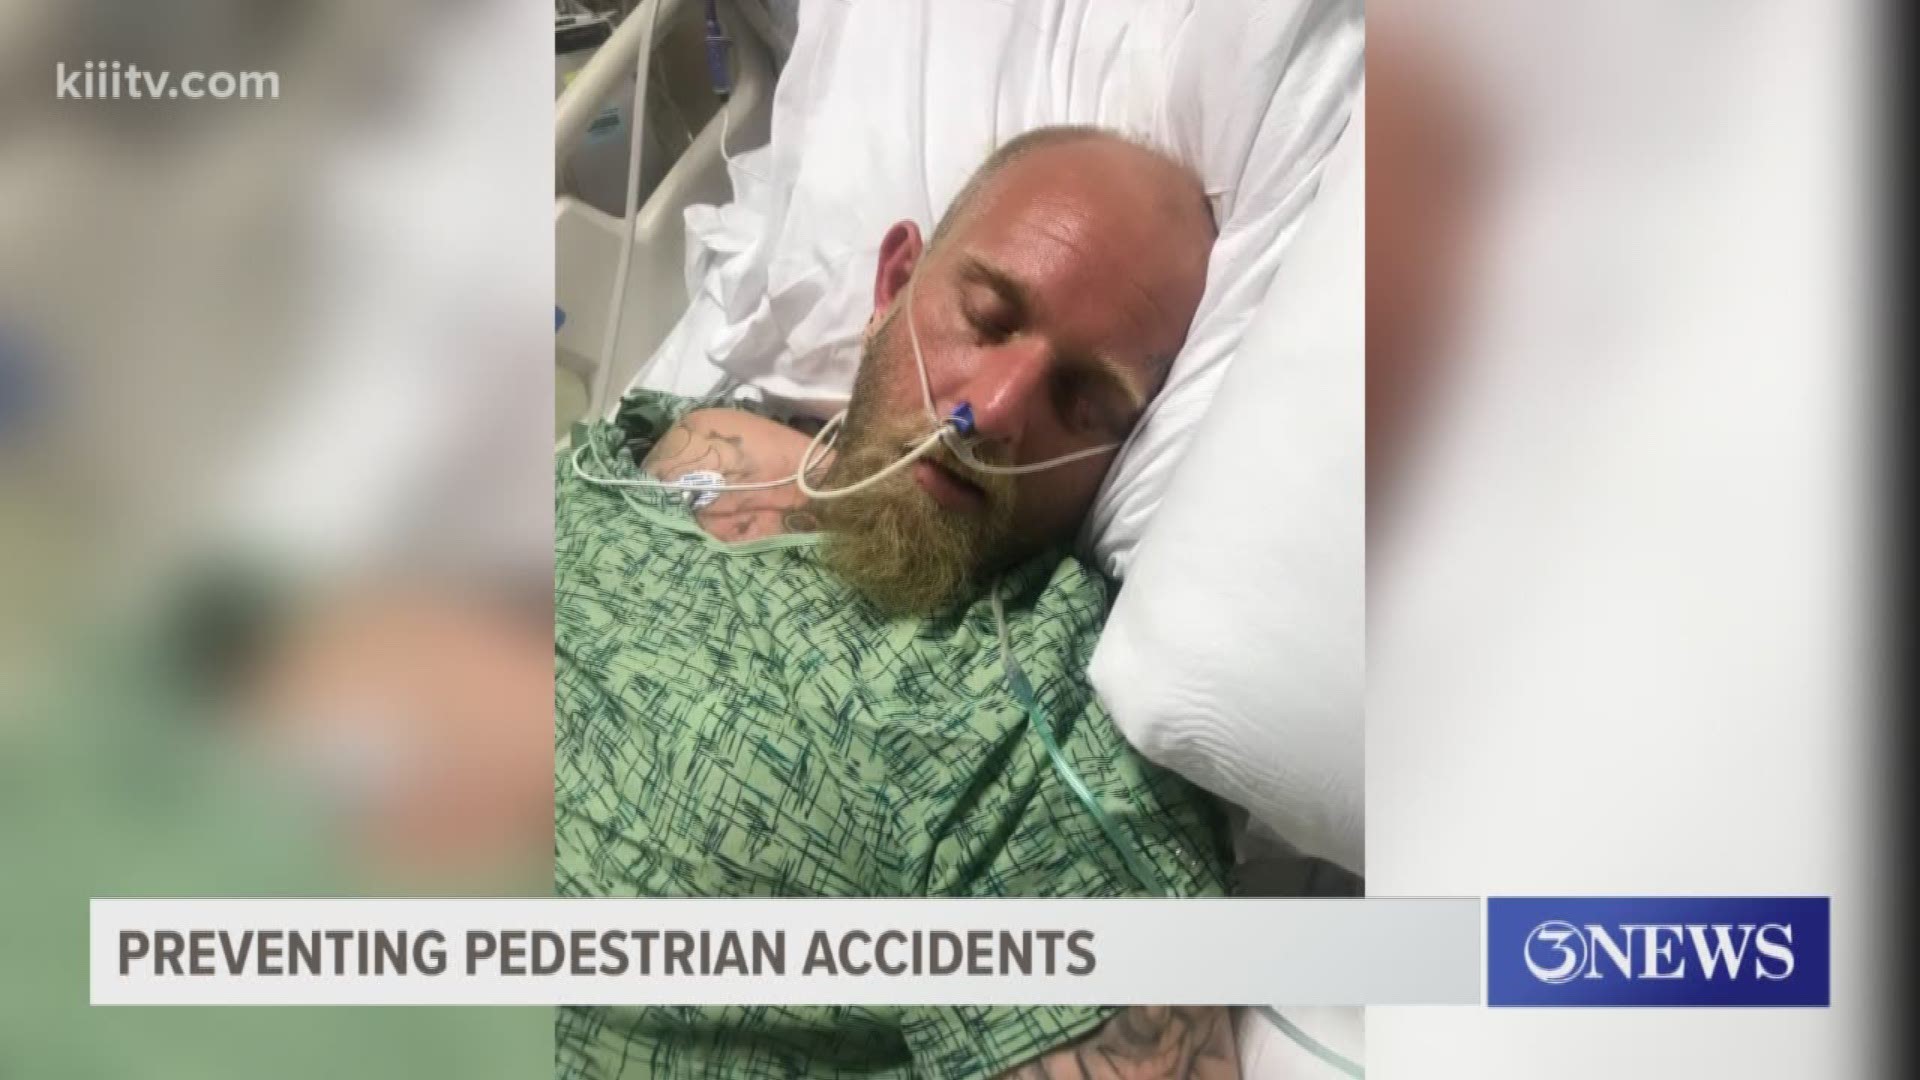 One Corpus Christi family is hoping the lighting along Saratoga Boulevard will be upgraded soon after their 34-year-old nephew was hit by a vehicle.